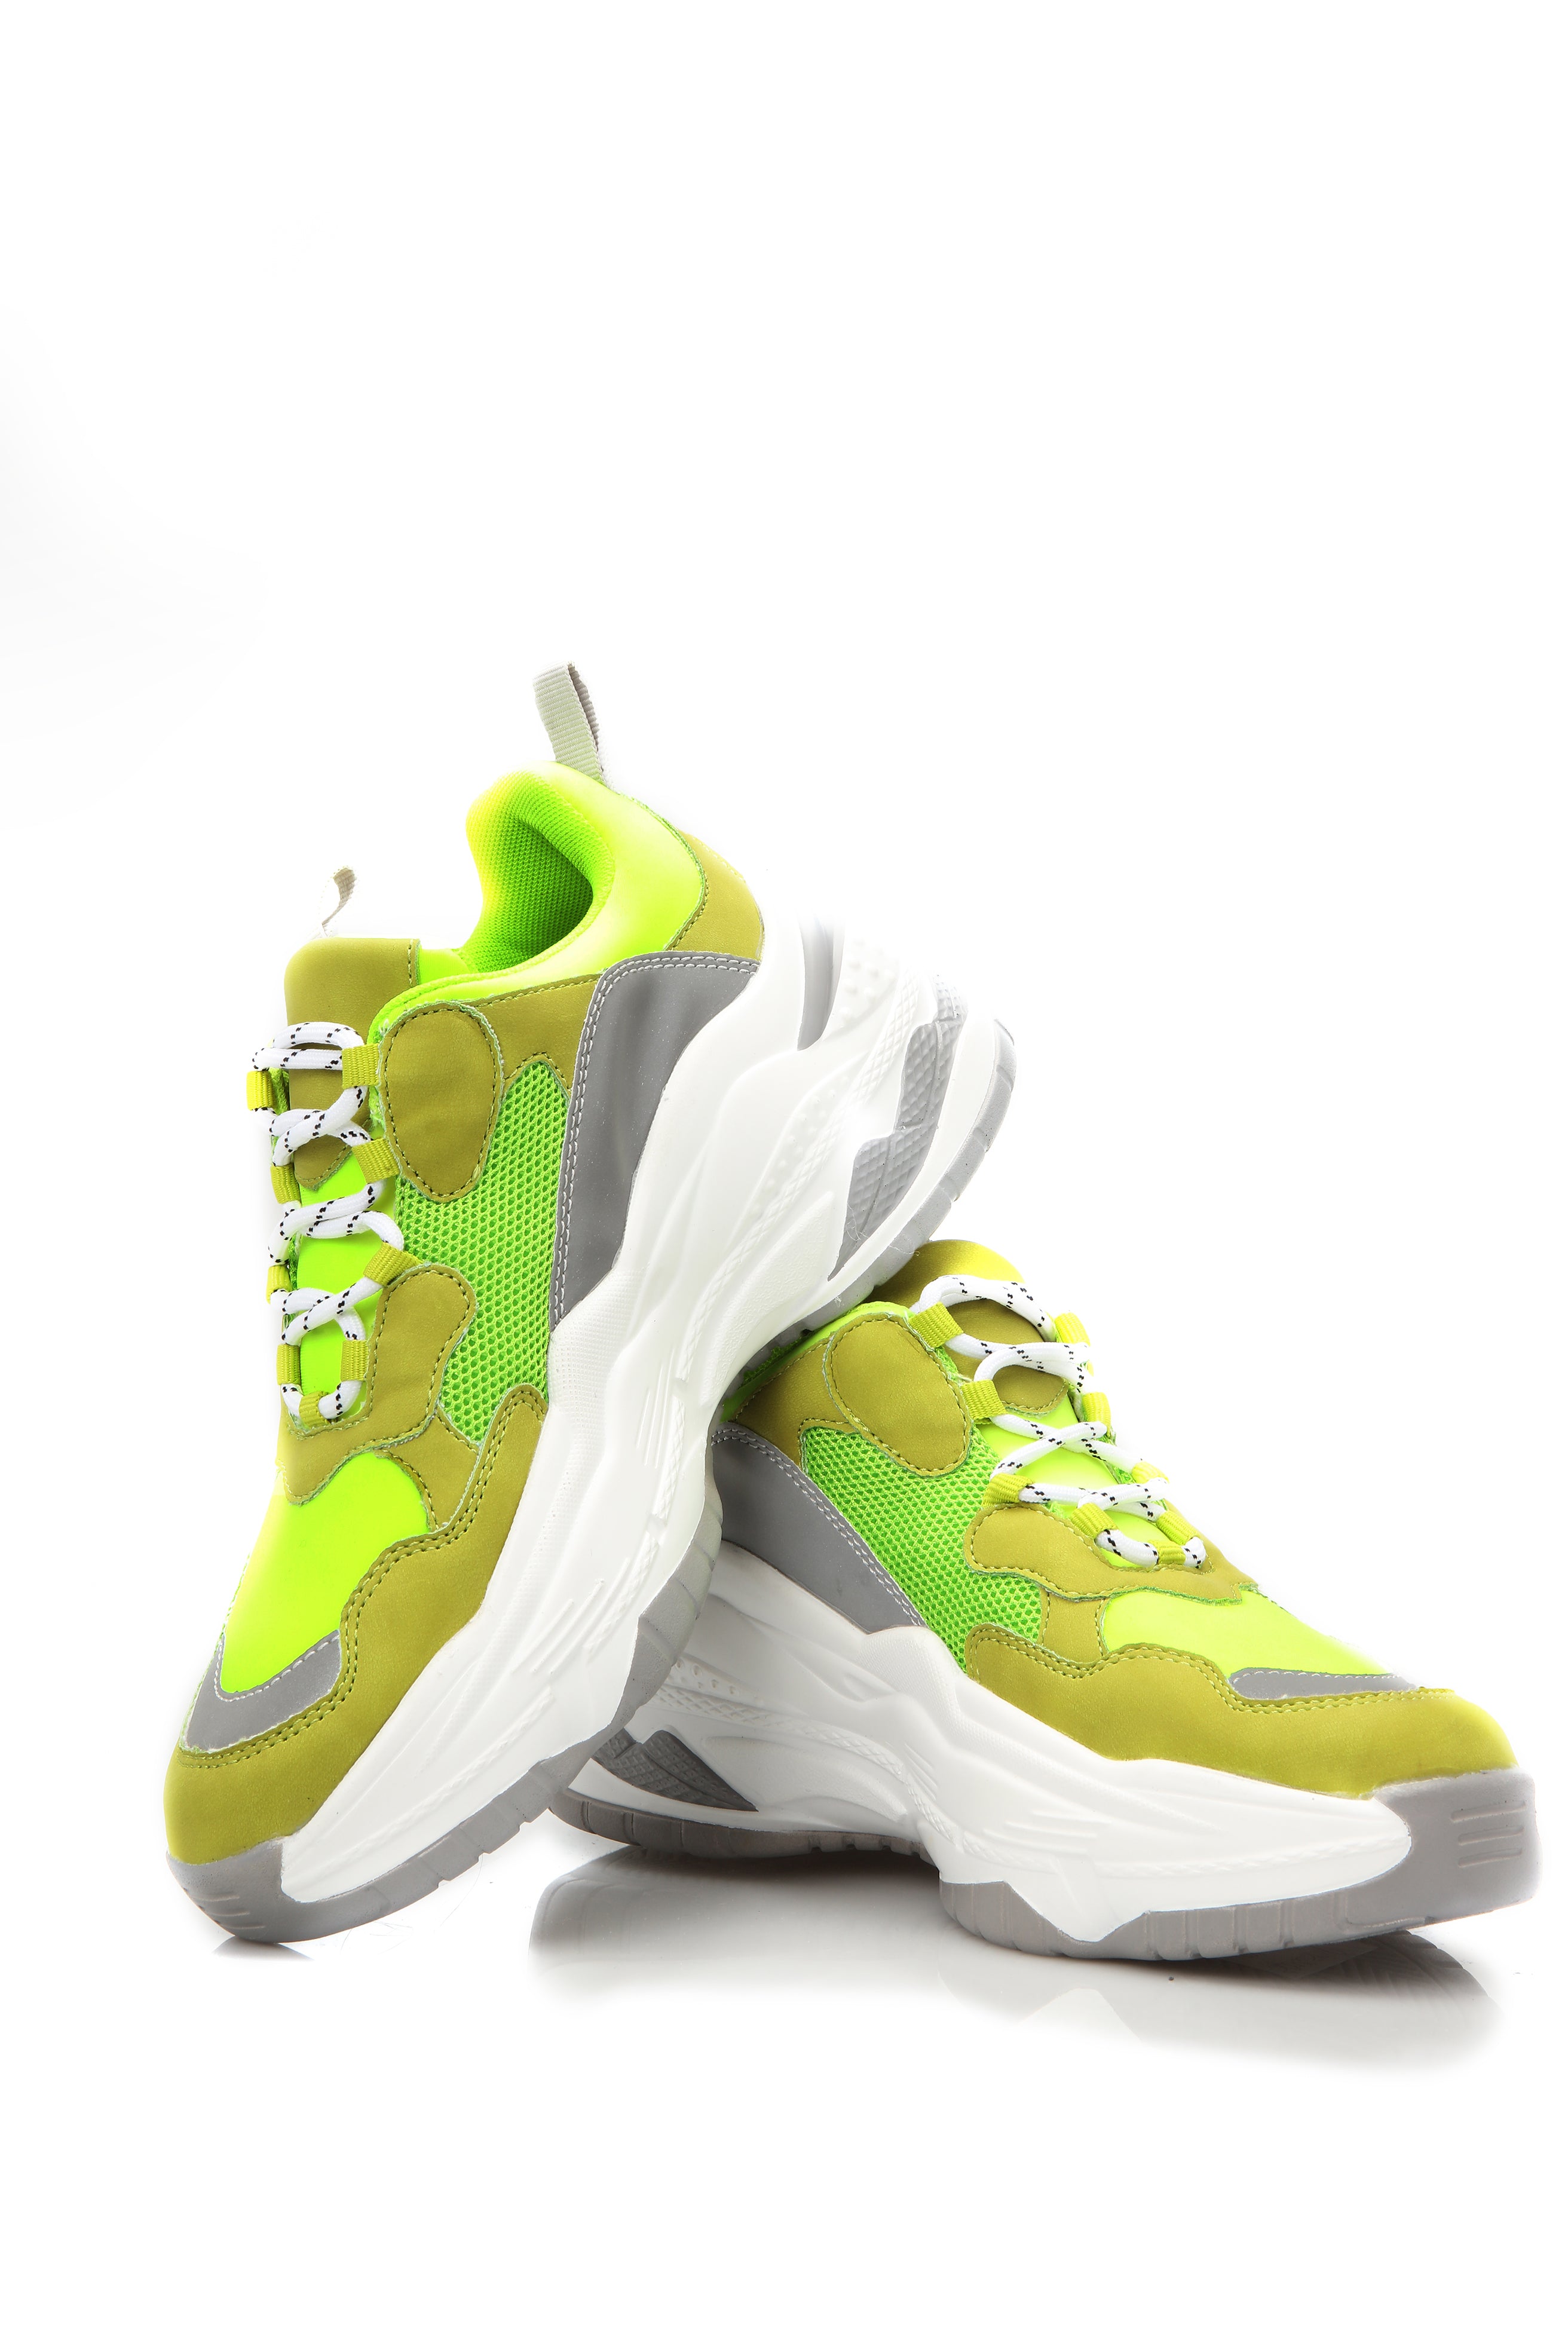 sneakers lime green